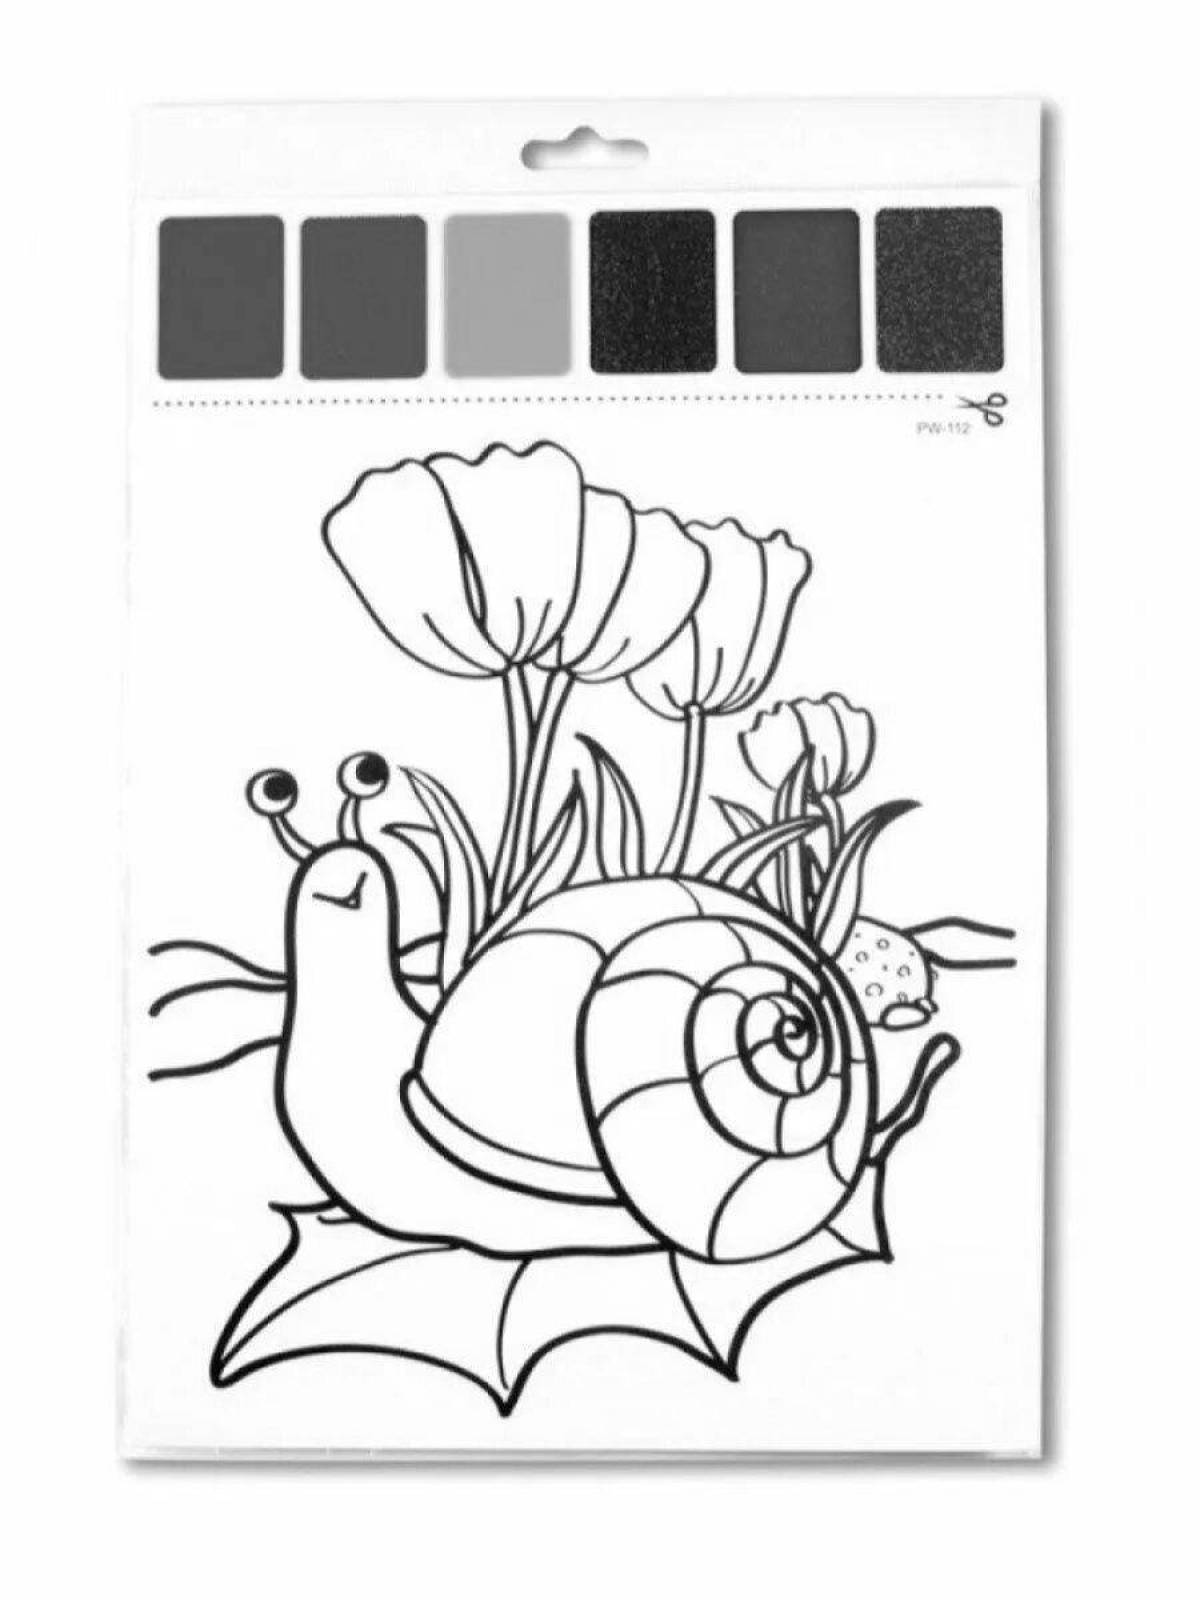 Photo Creative watercolor coloring book for 5 year olds